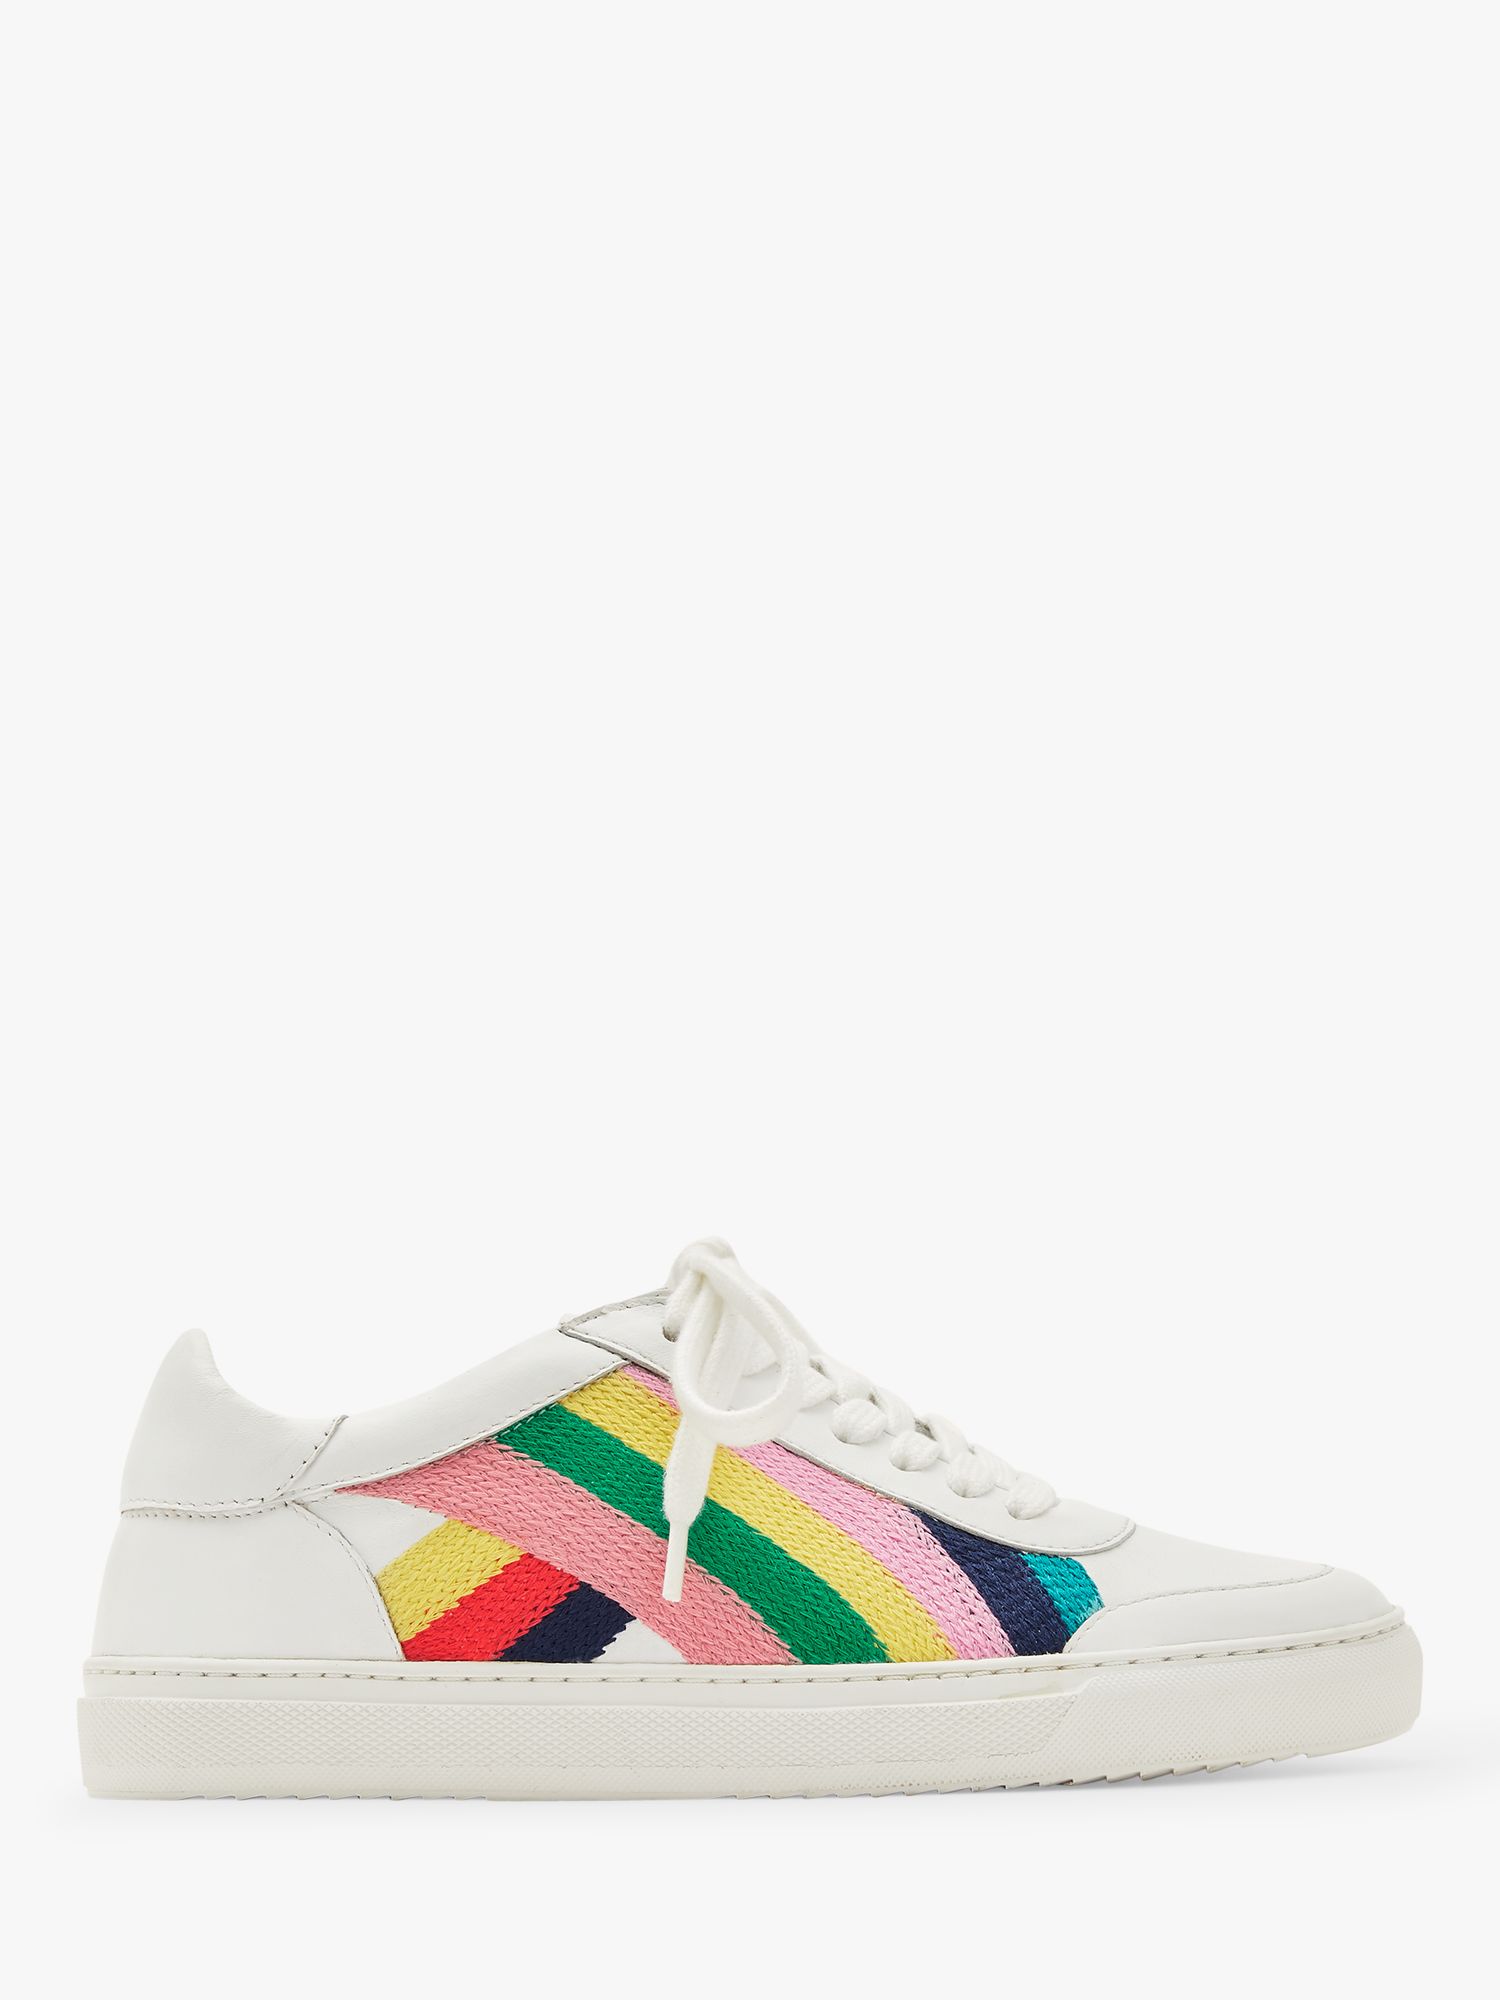 Boden Helen Leather Embroidered Rainbow Trainers, White